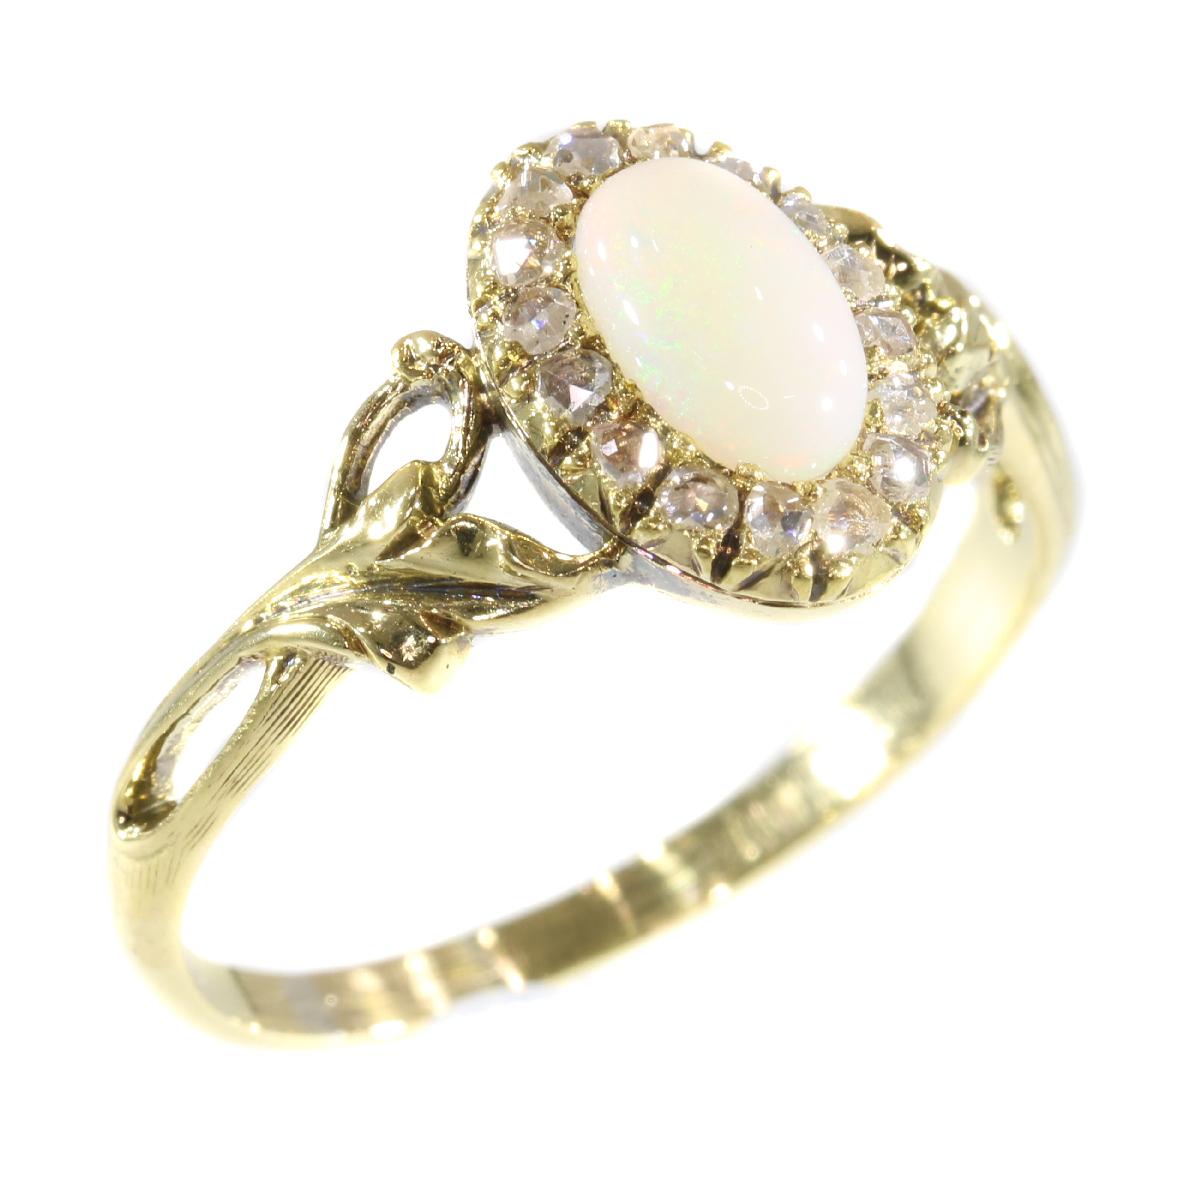 French Antique Art Nouveau Gold Ring with Diamonds and Opal 4